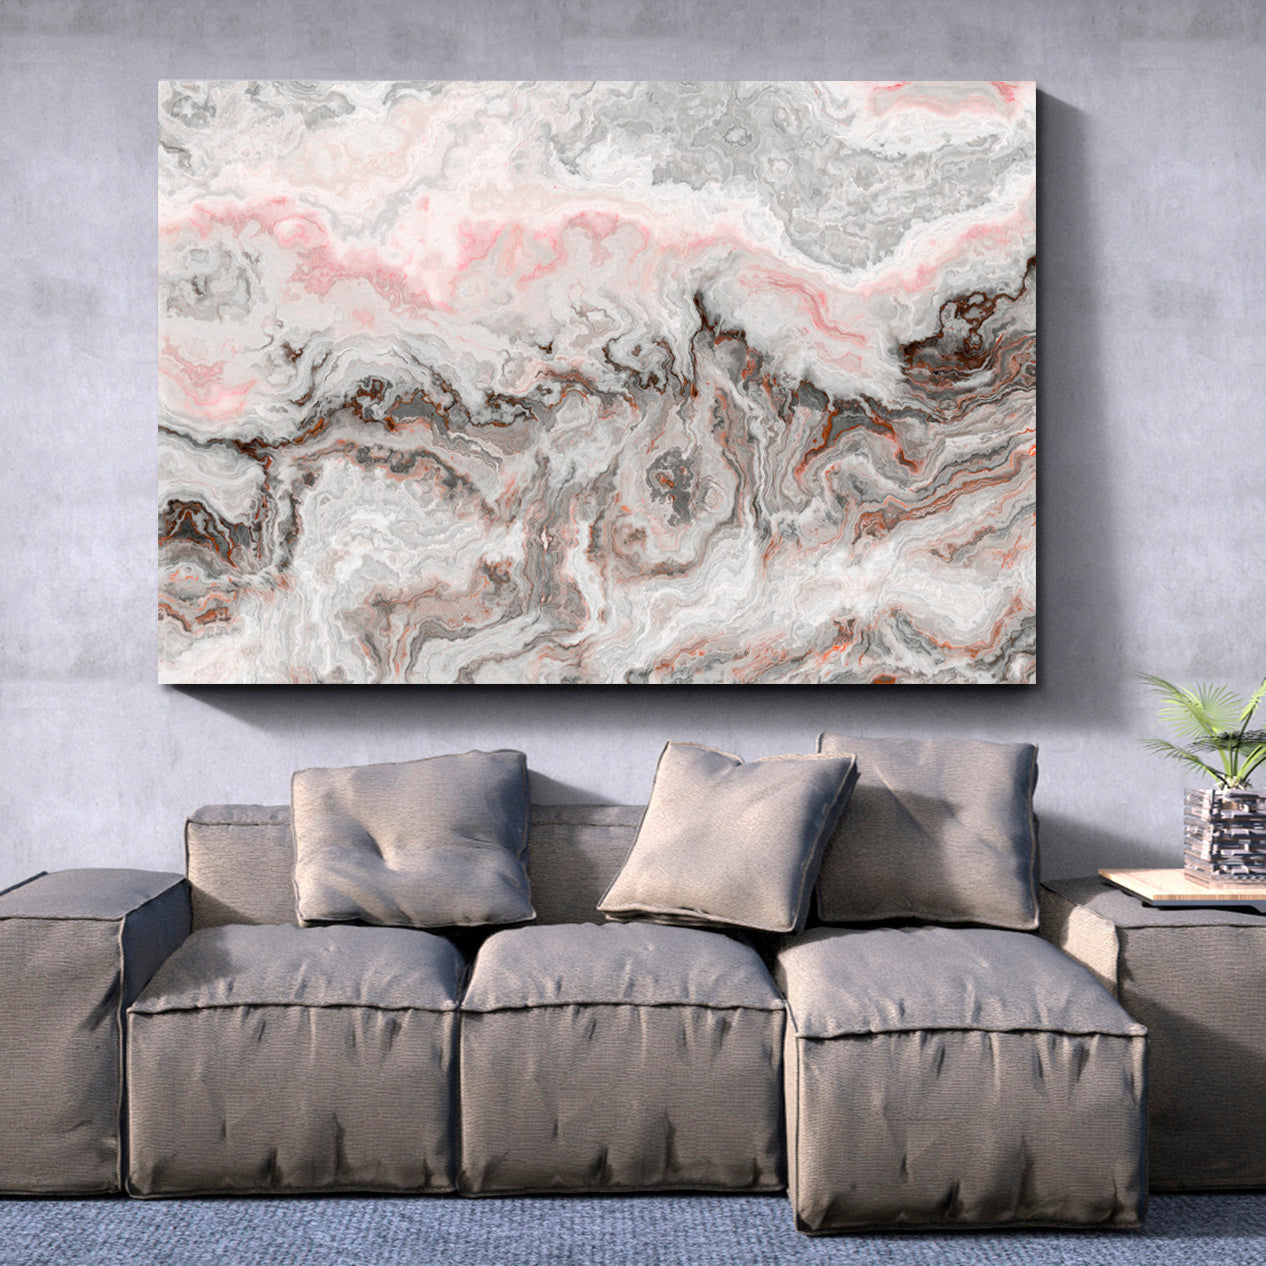 Marble Pattern Gray Off White Pink Beige Pastel Colors Fluid Art, Oriental Marbling Canvas Print Artesty 1 panel 24" x 16" 